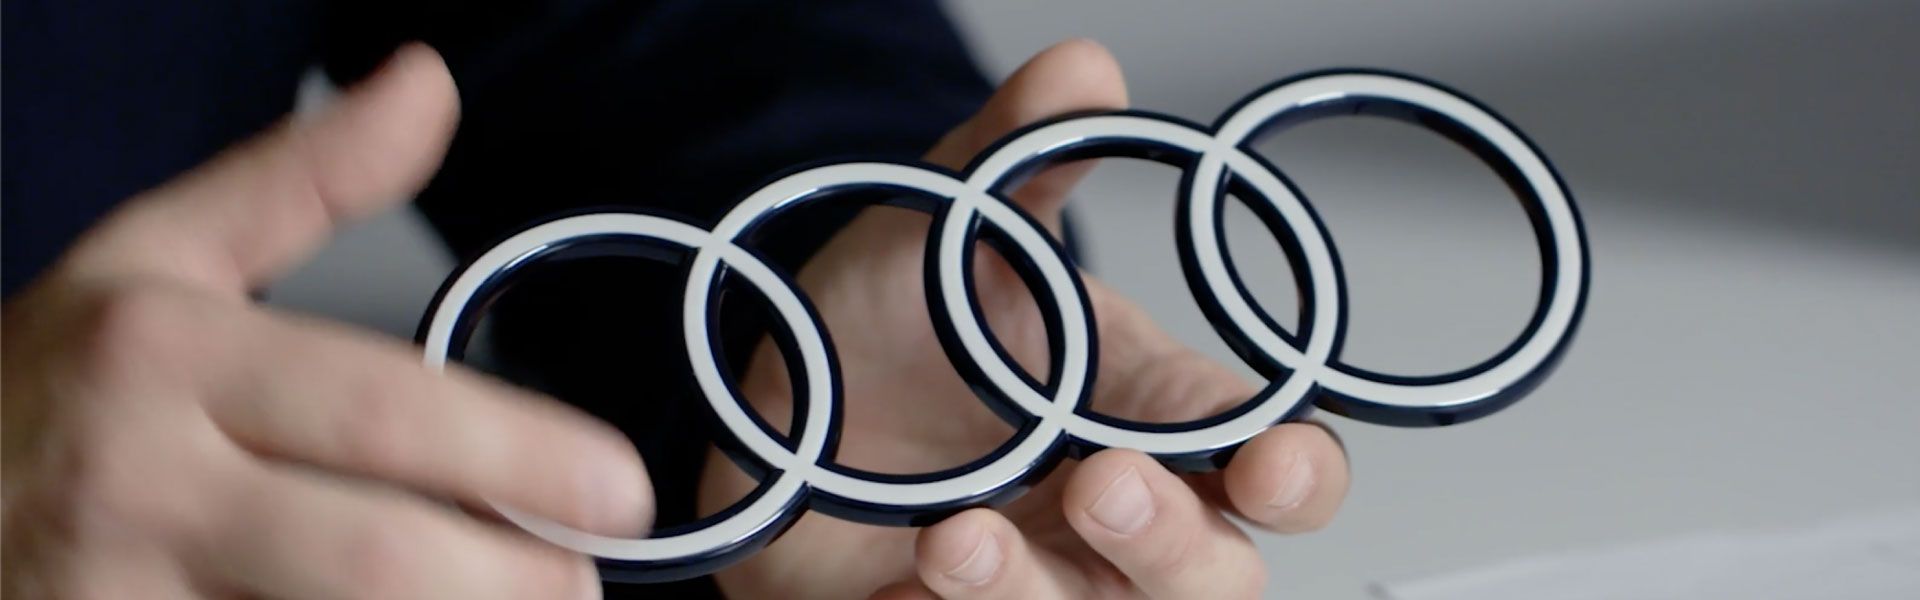 Hands holding an Audi logo as a profile